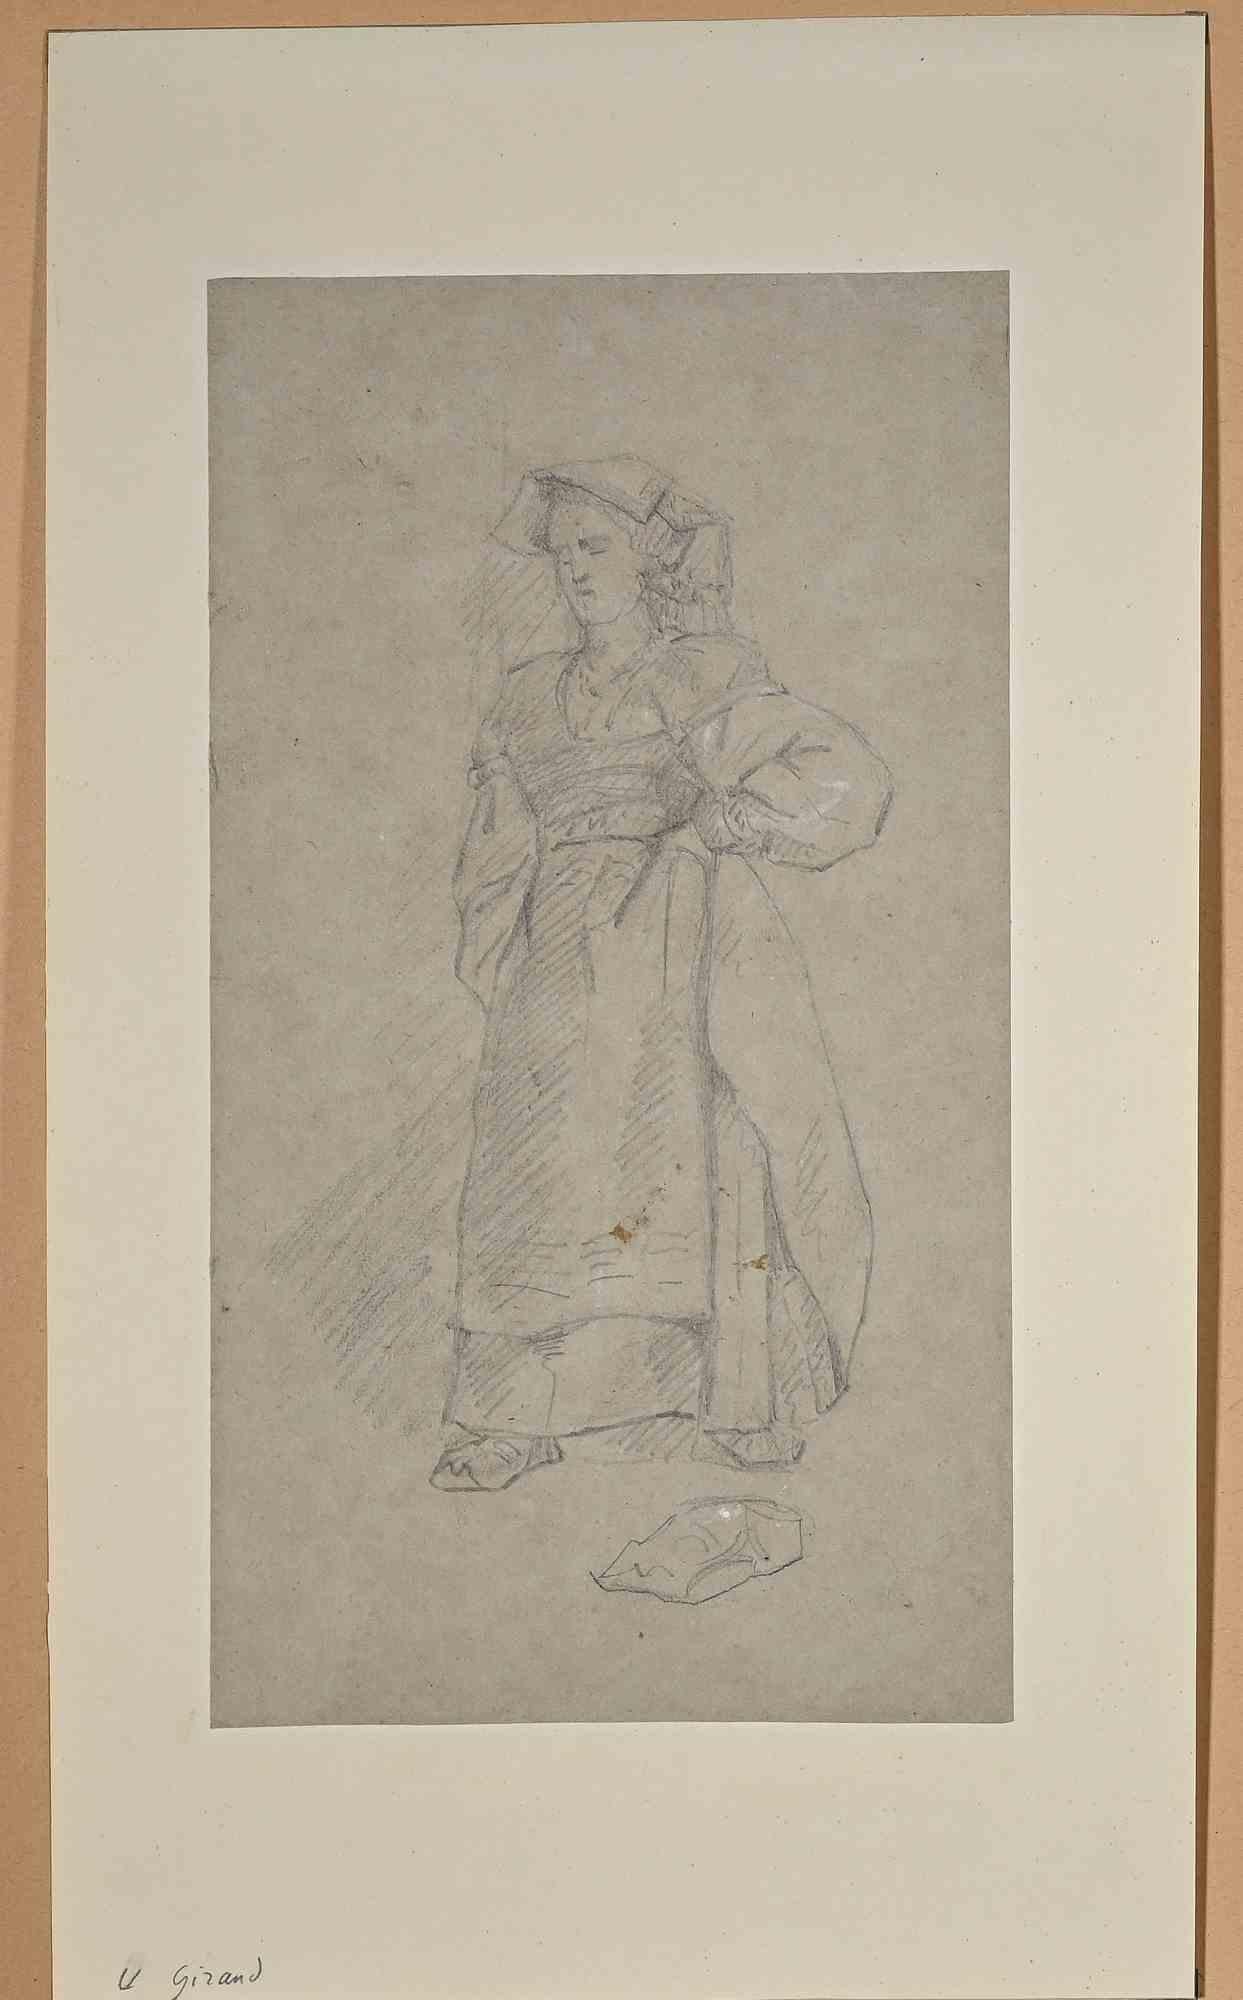 The Maidservant -  Original Drawing in Pencil by E. Giraud - Late 19th Century - Art by Eugène Giraud